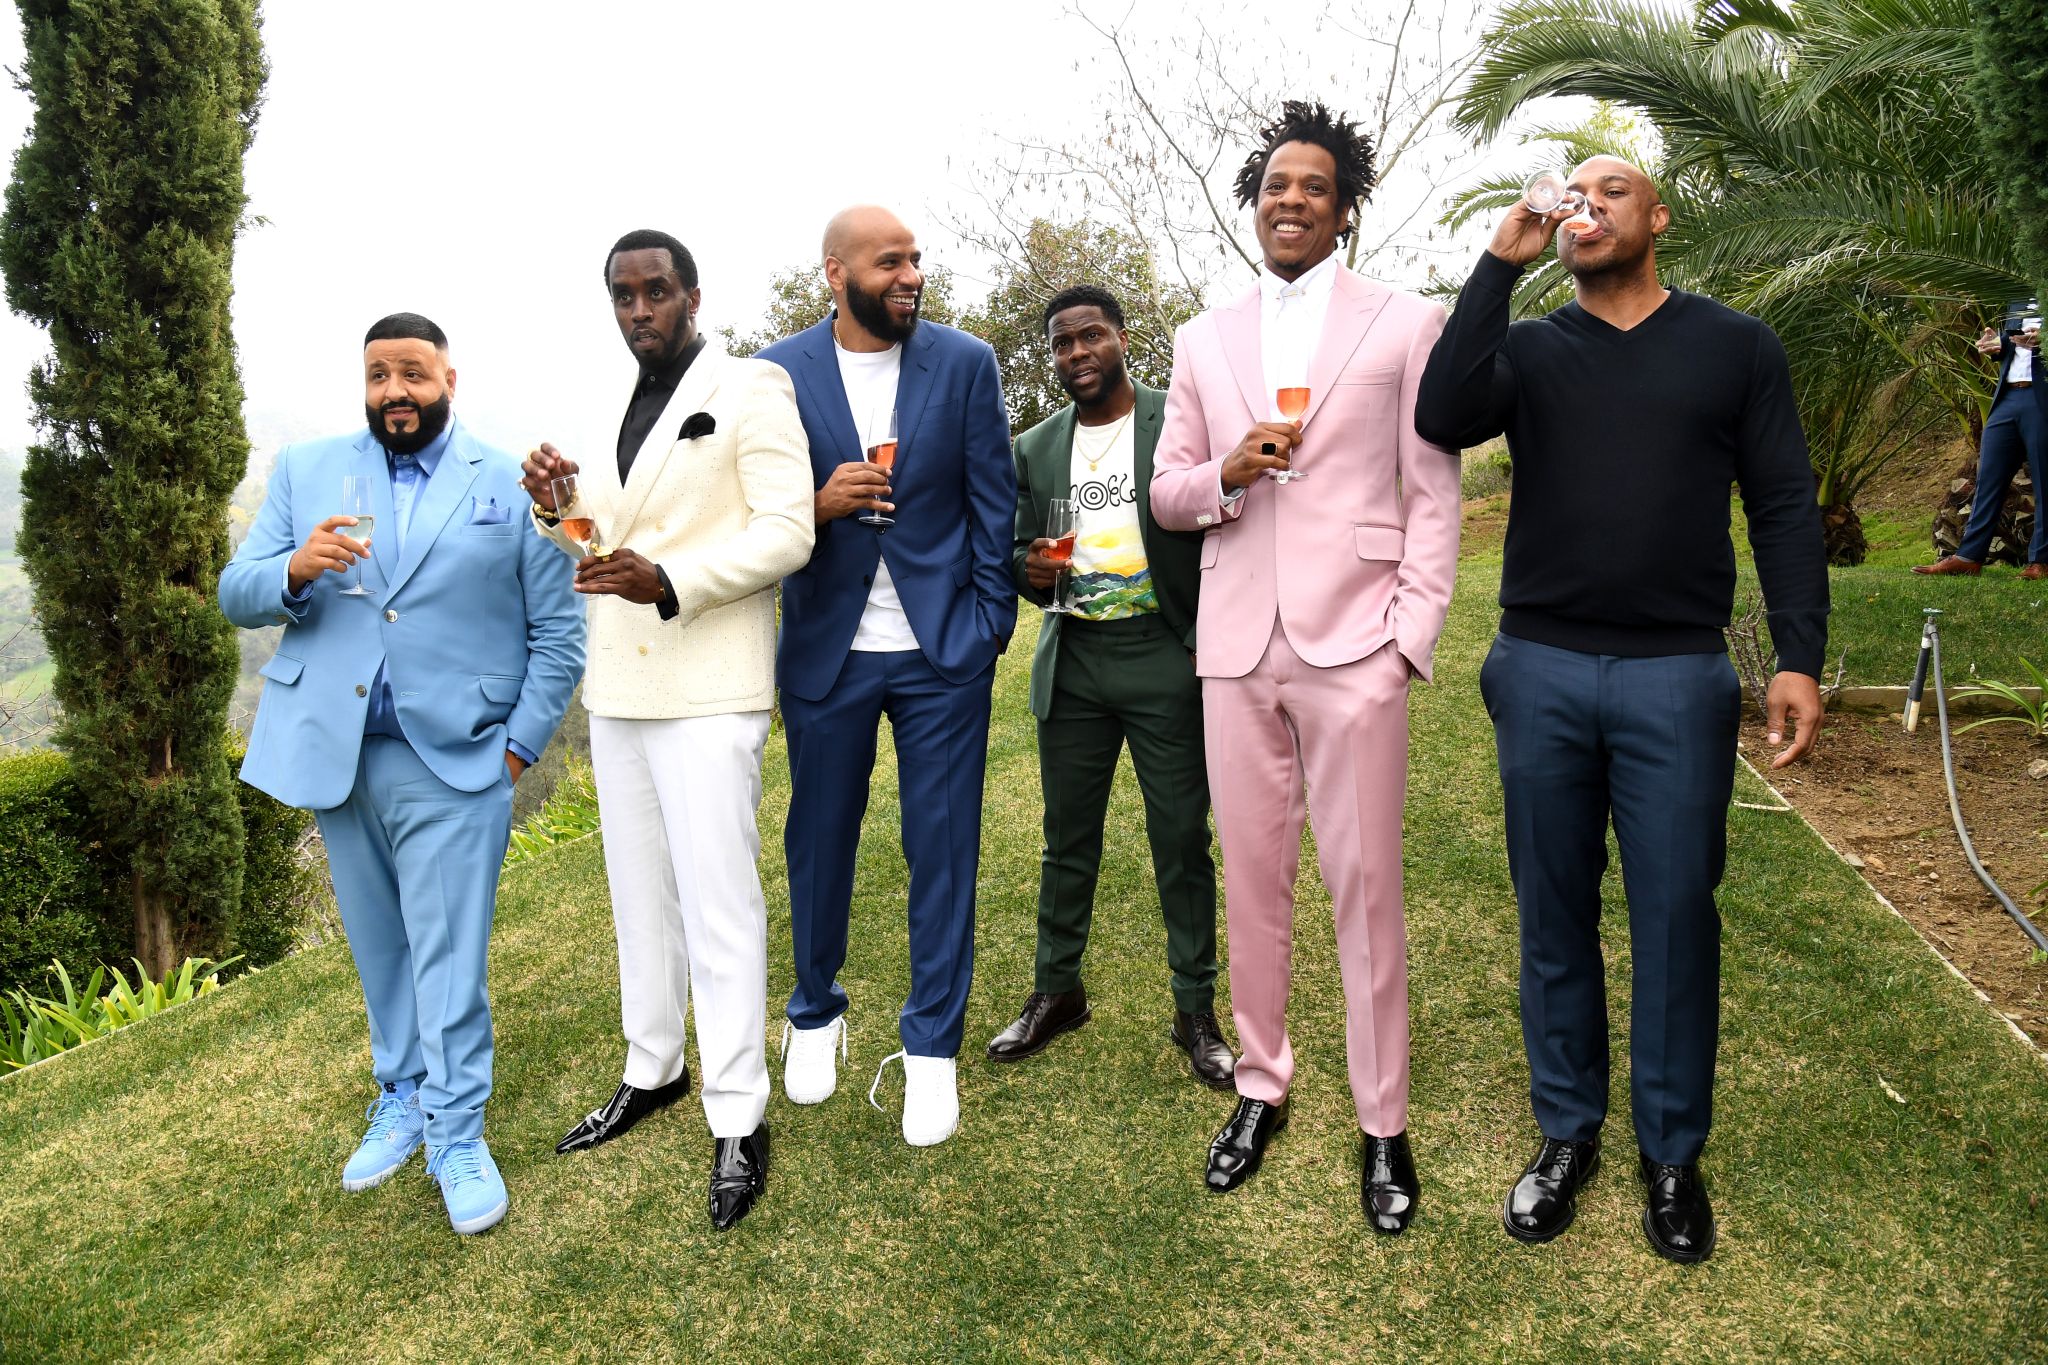 Take A Look At All The Brunchin' That Happened At The Roc Nation Brunch